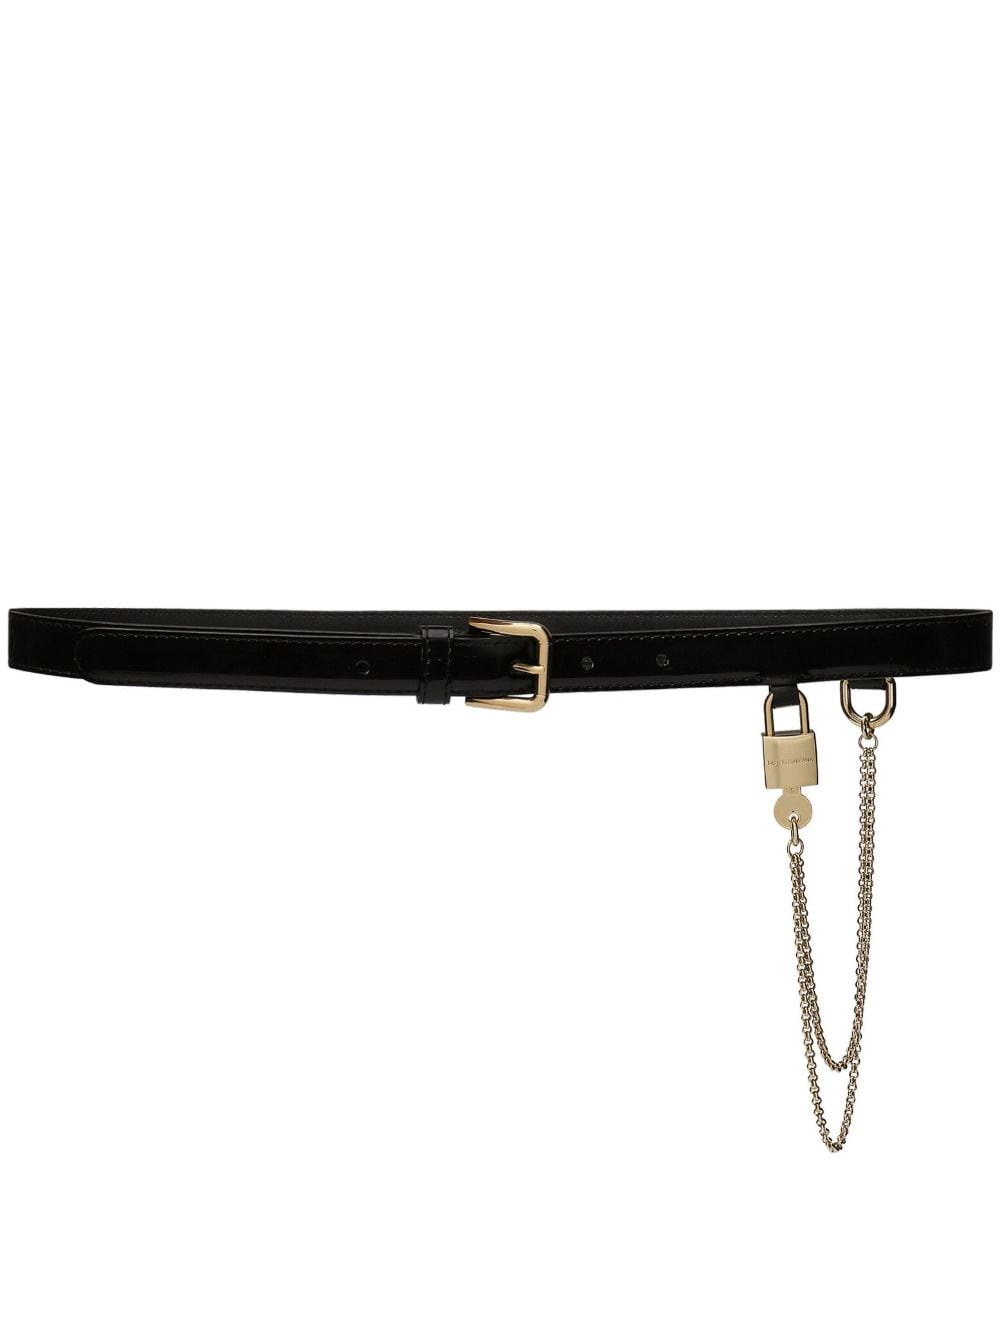 chain-link patent leather belt